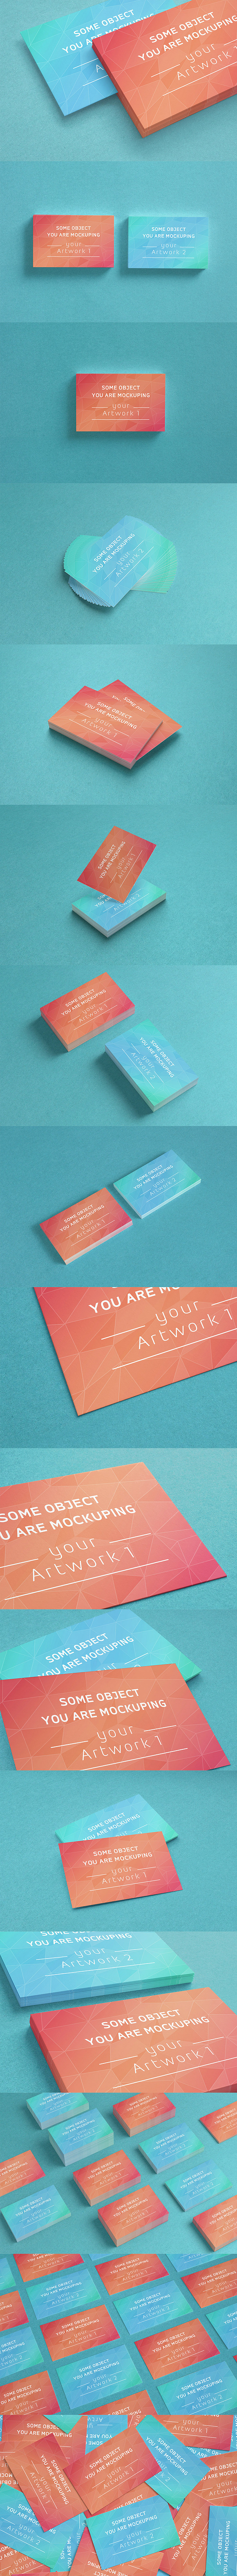 UK Business Cards Mock-up's Pack in Print Mockups - product preview 4